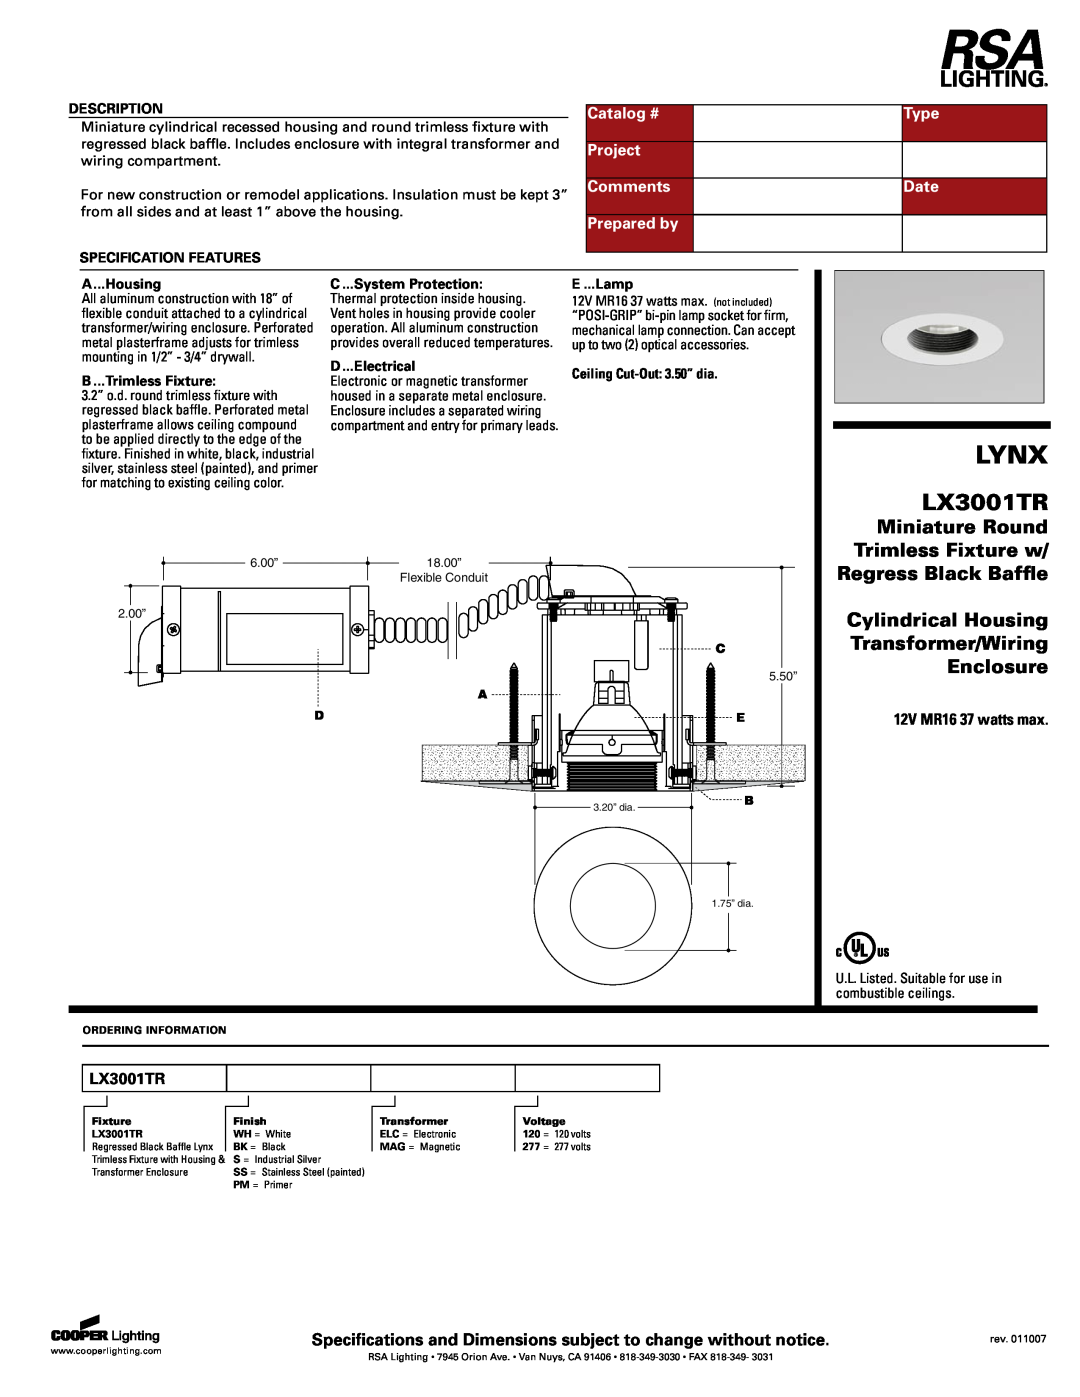 Cooper Lighting LX3001TR specifications Lynx, Cylindrical Housing Transformer/Wiring Enclosure, Type Date, Description 